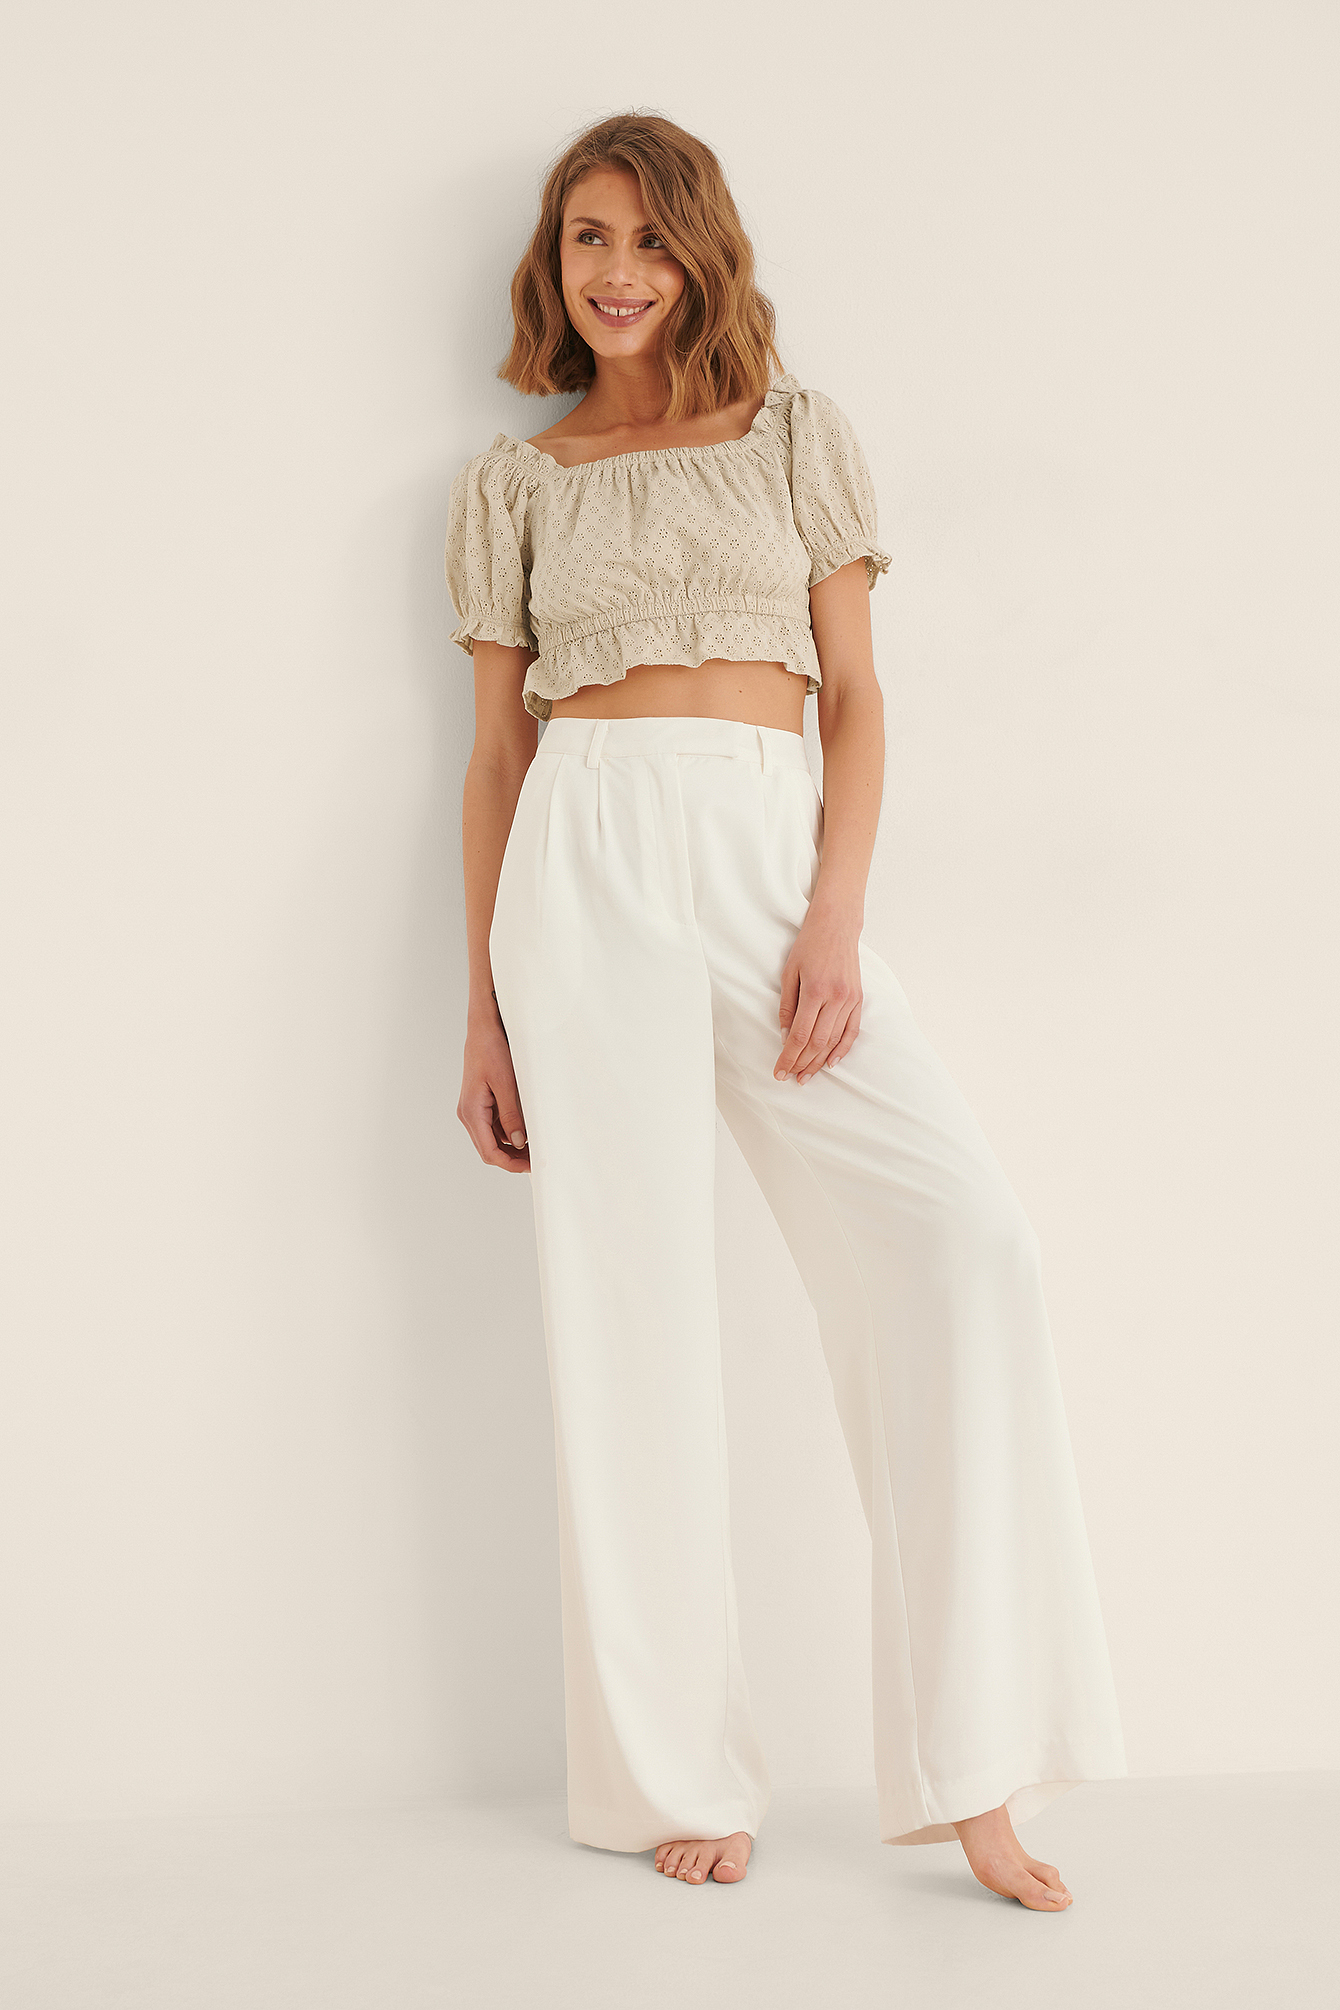 Anglaise Cropped Top Outfit.